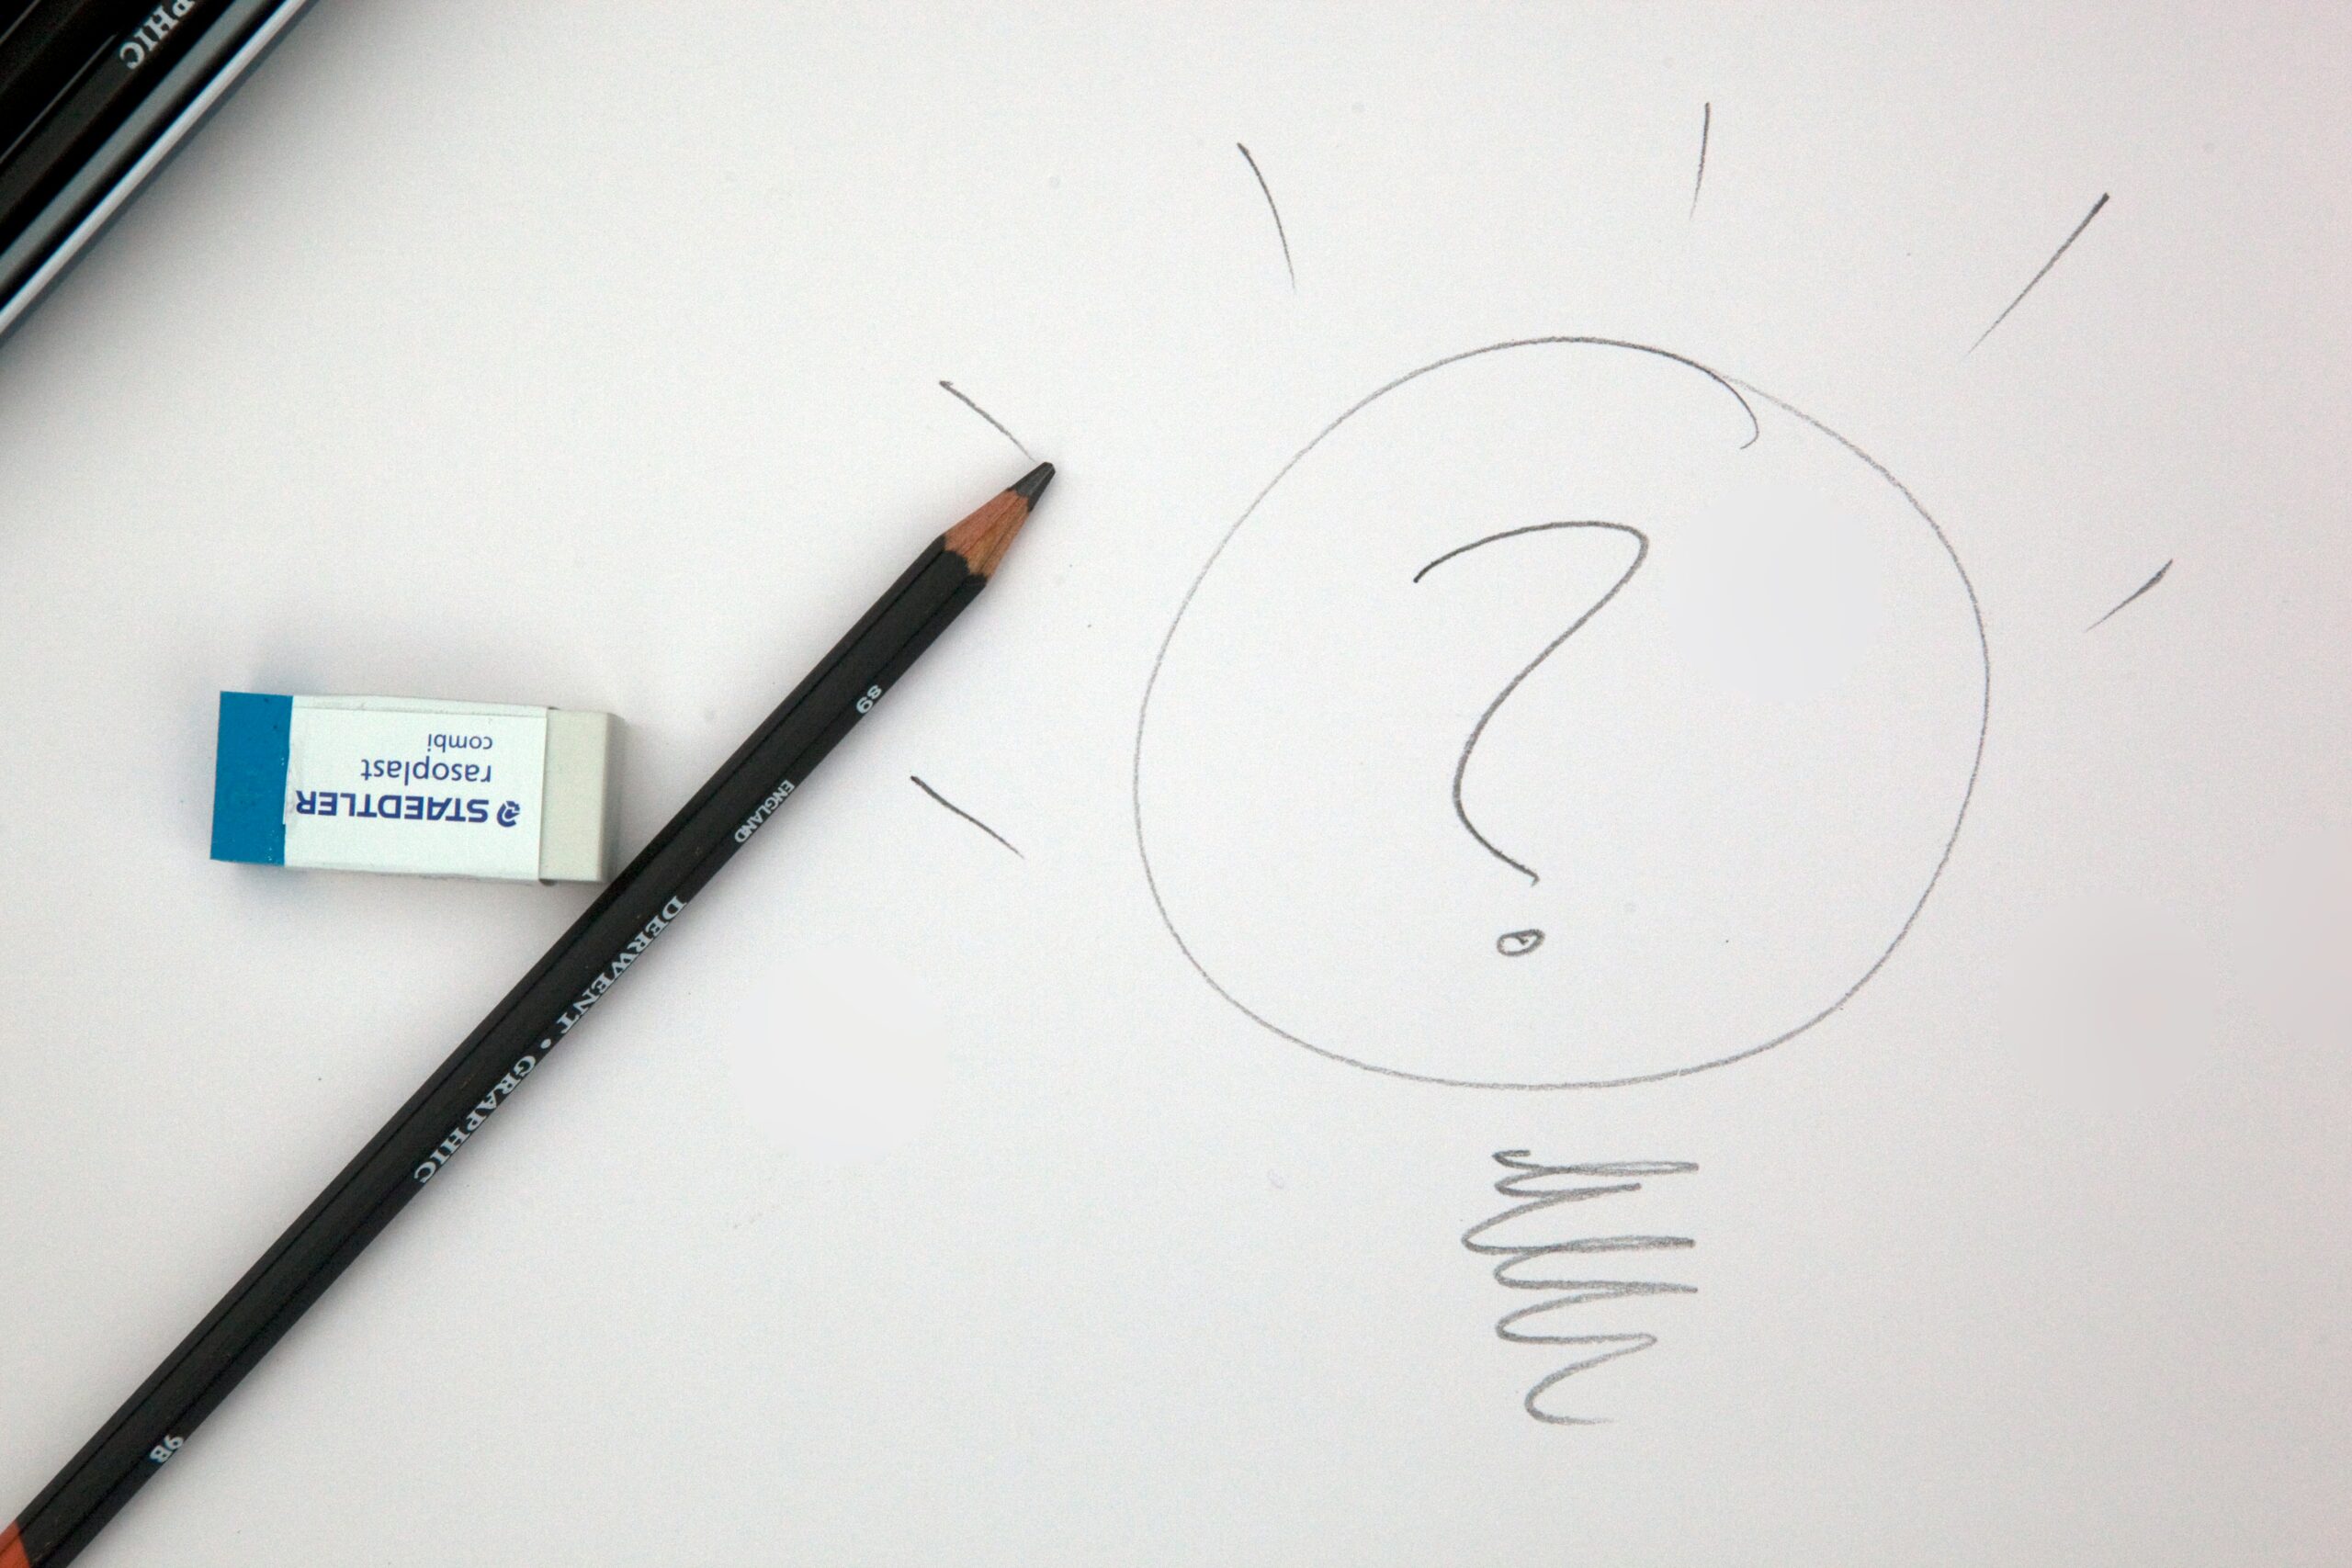 A question mark in a light bulb is drawn on a piece of white paper.